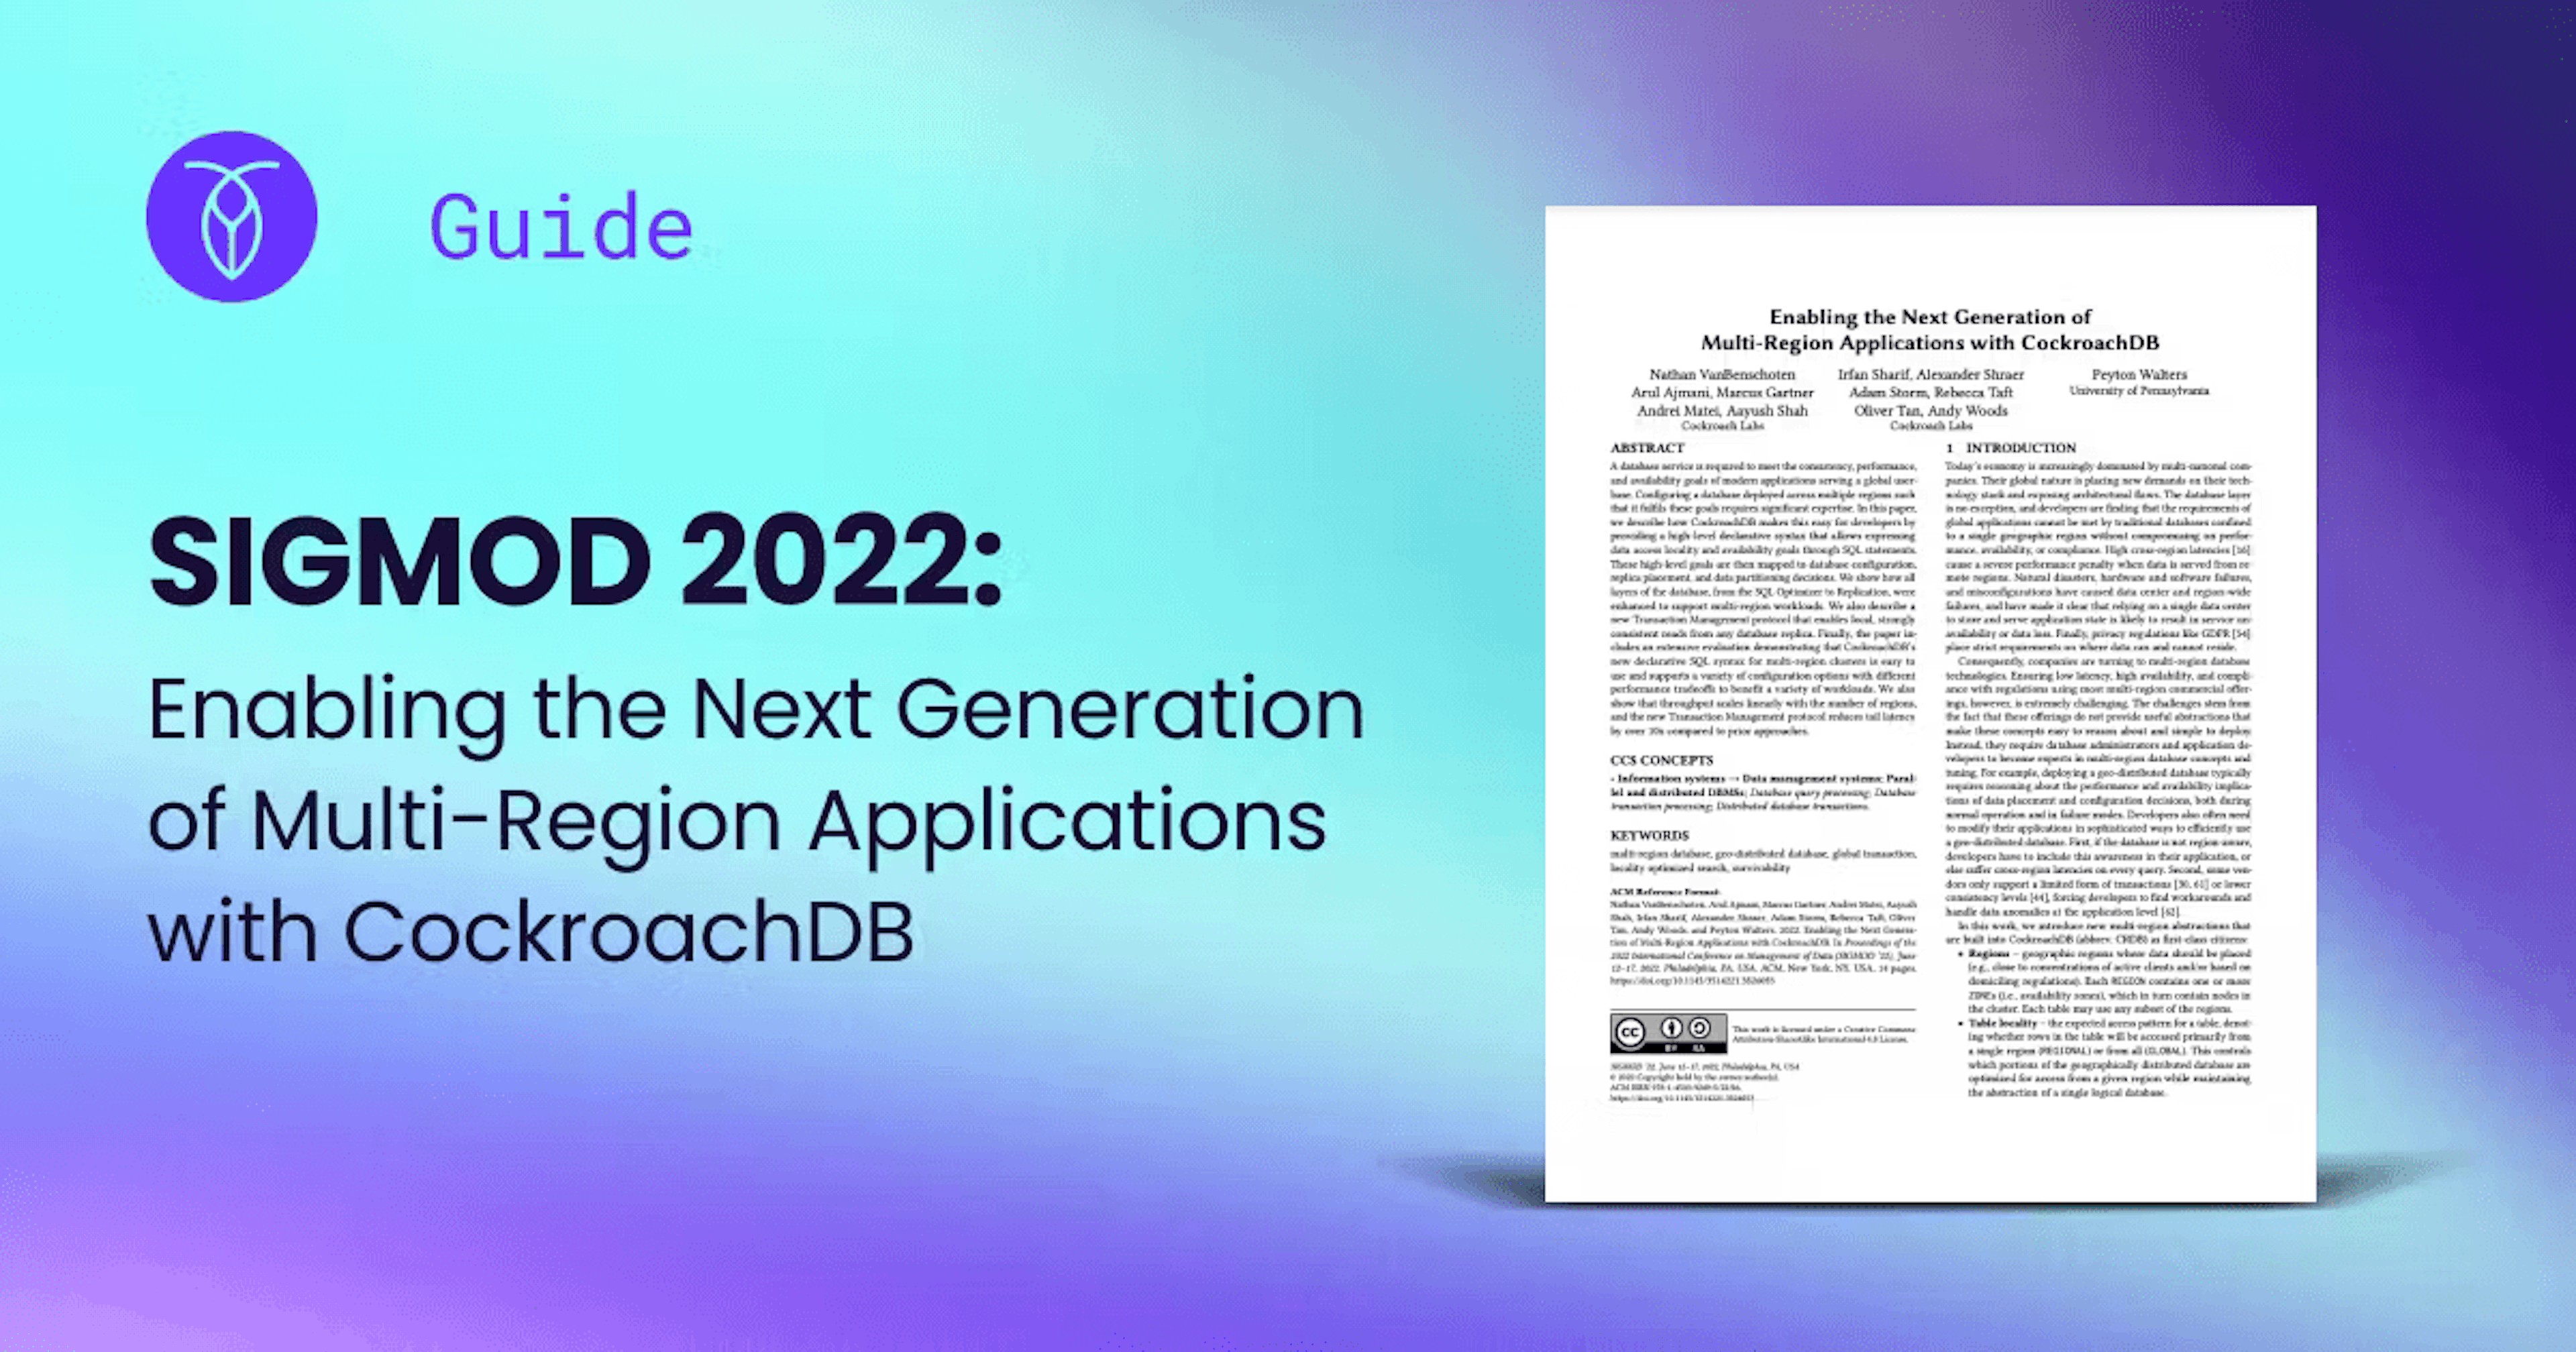 crl-open-graph-sigmod-2020-and-sigmod-2022